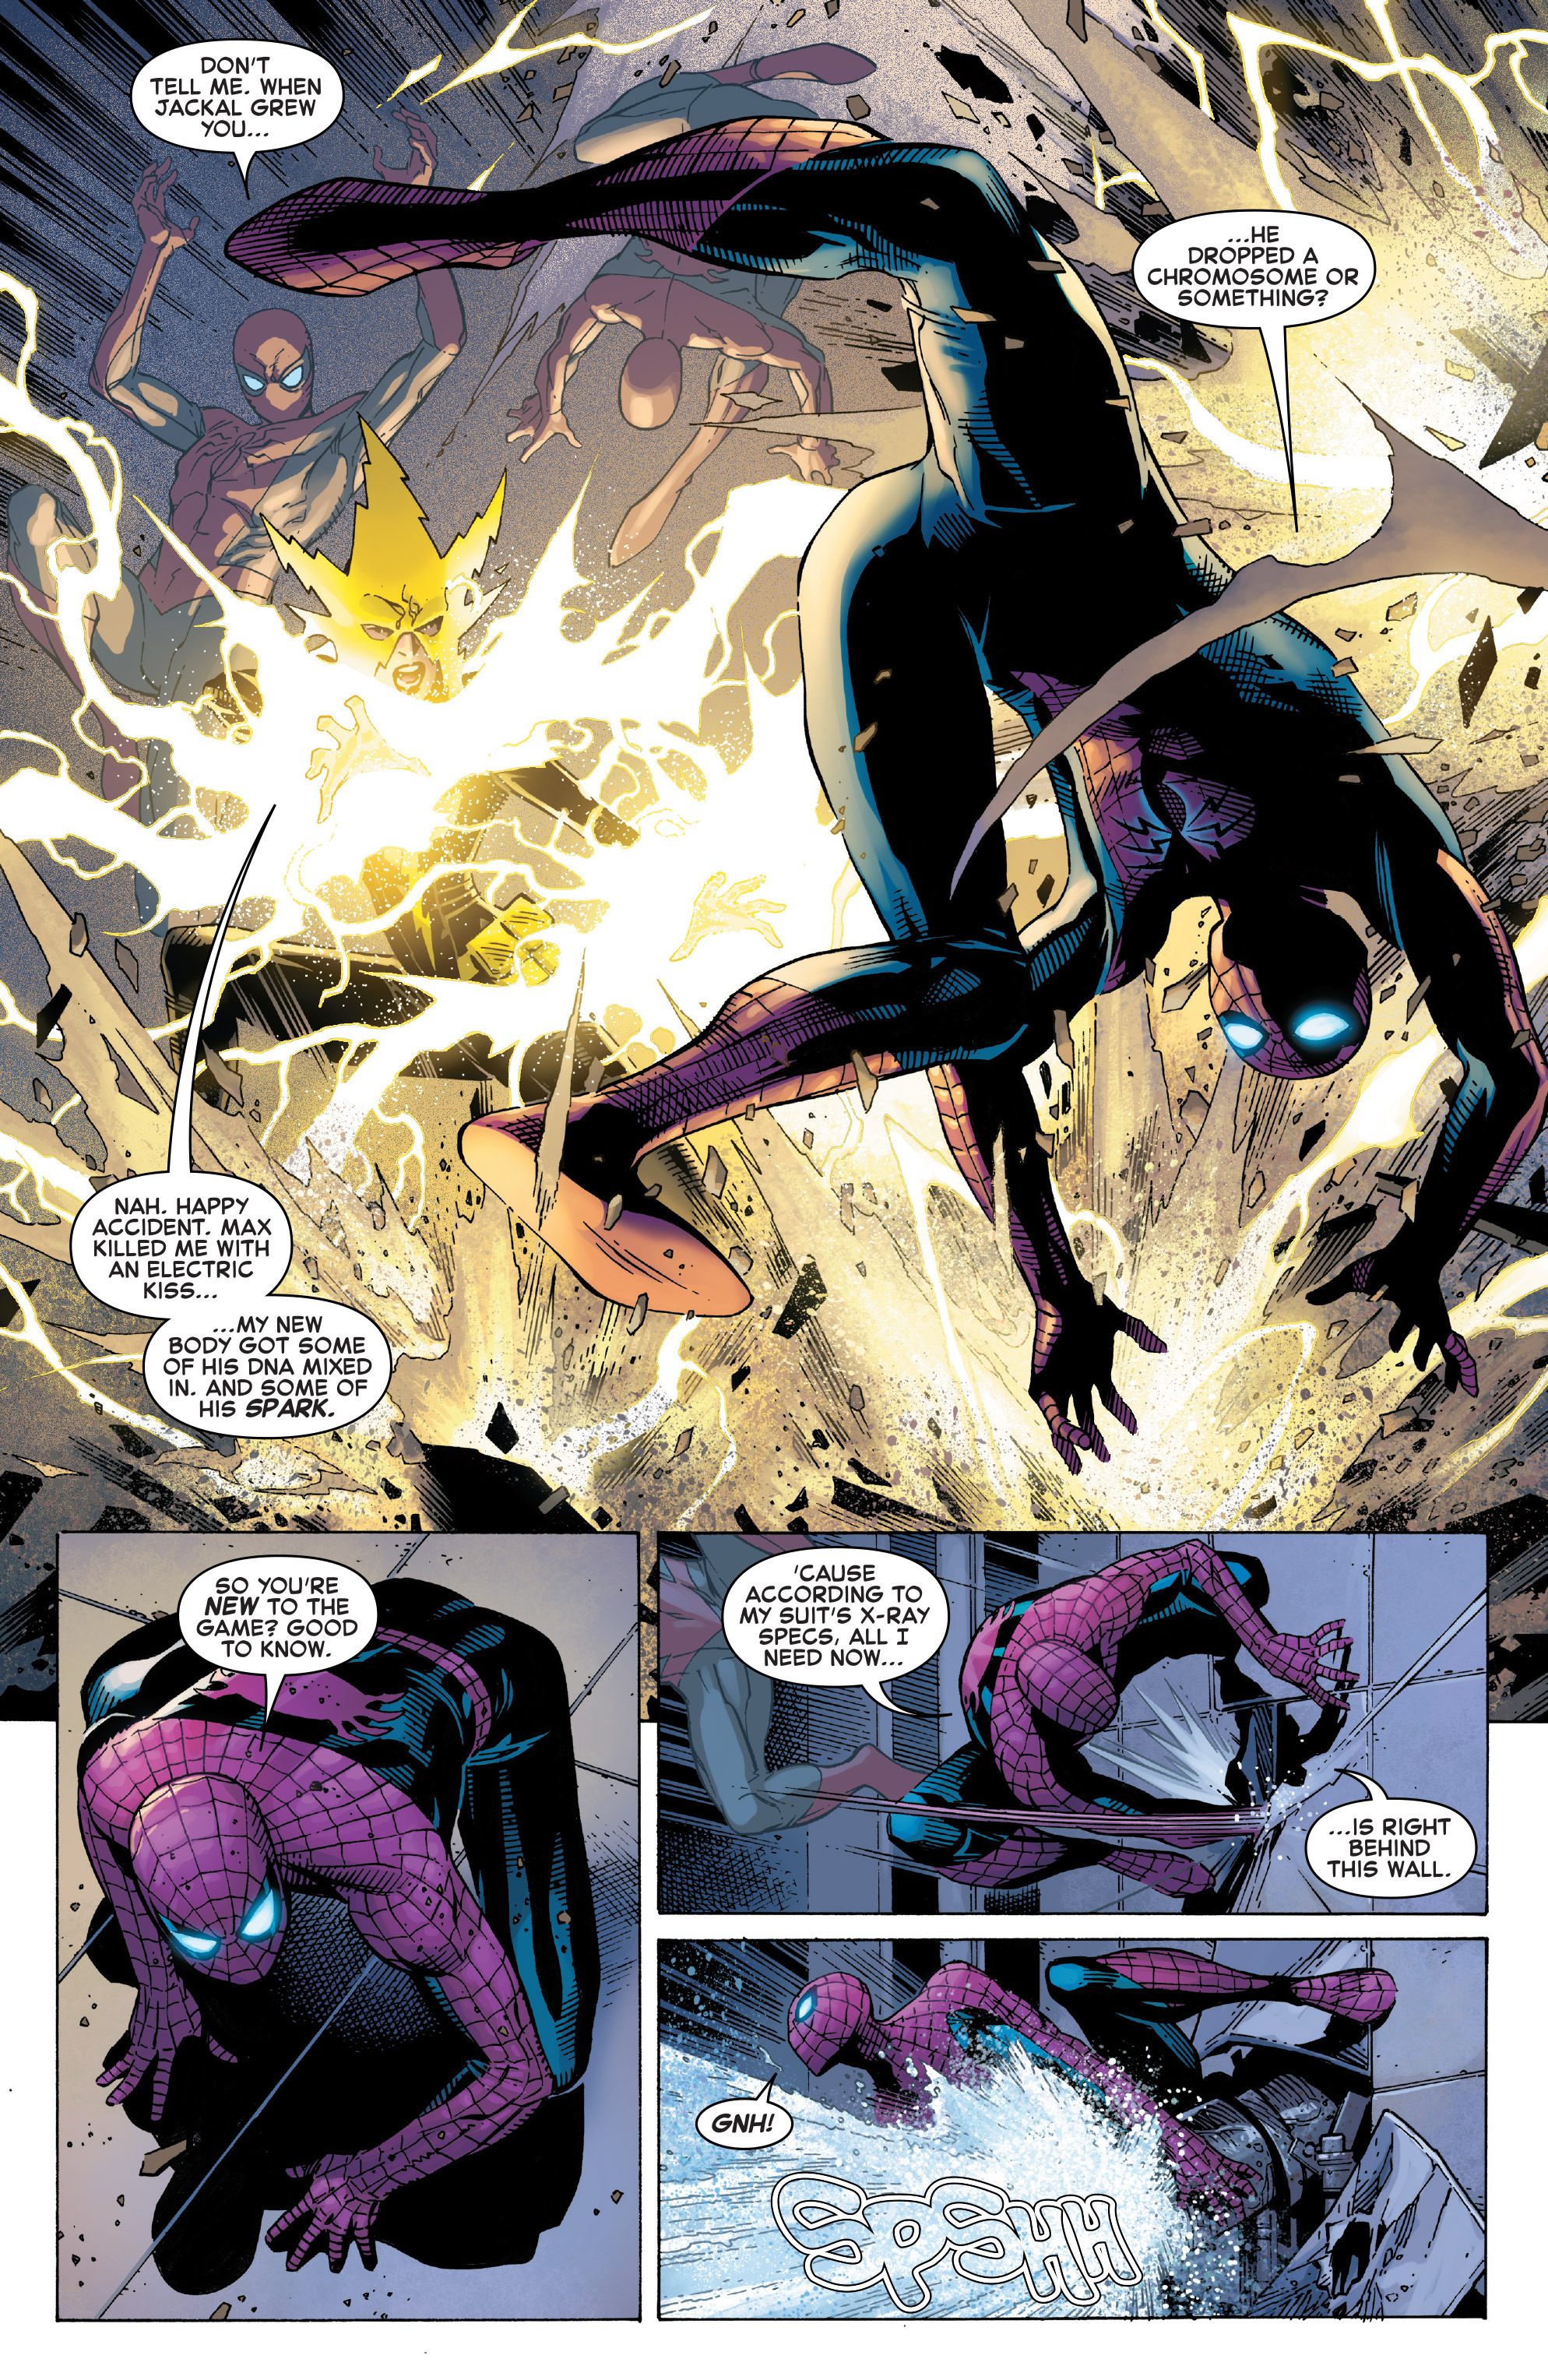 Amazing Spider-Man: The Clone Conspiracy (TPB): Chapter 1 - Page 61.